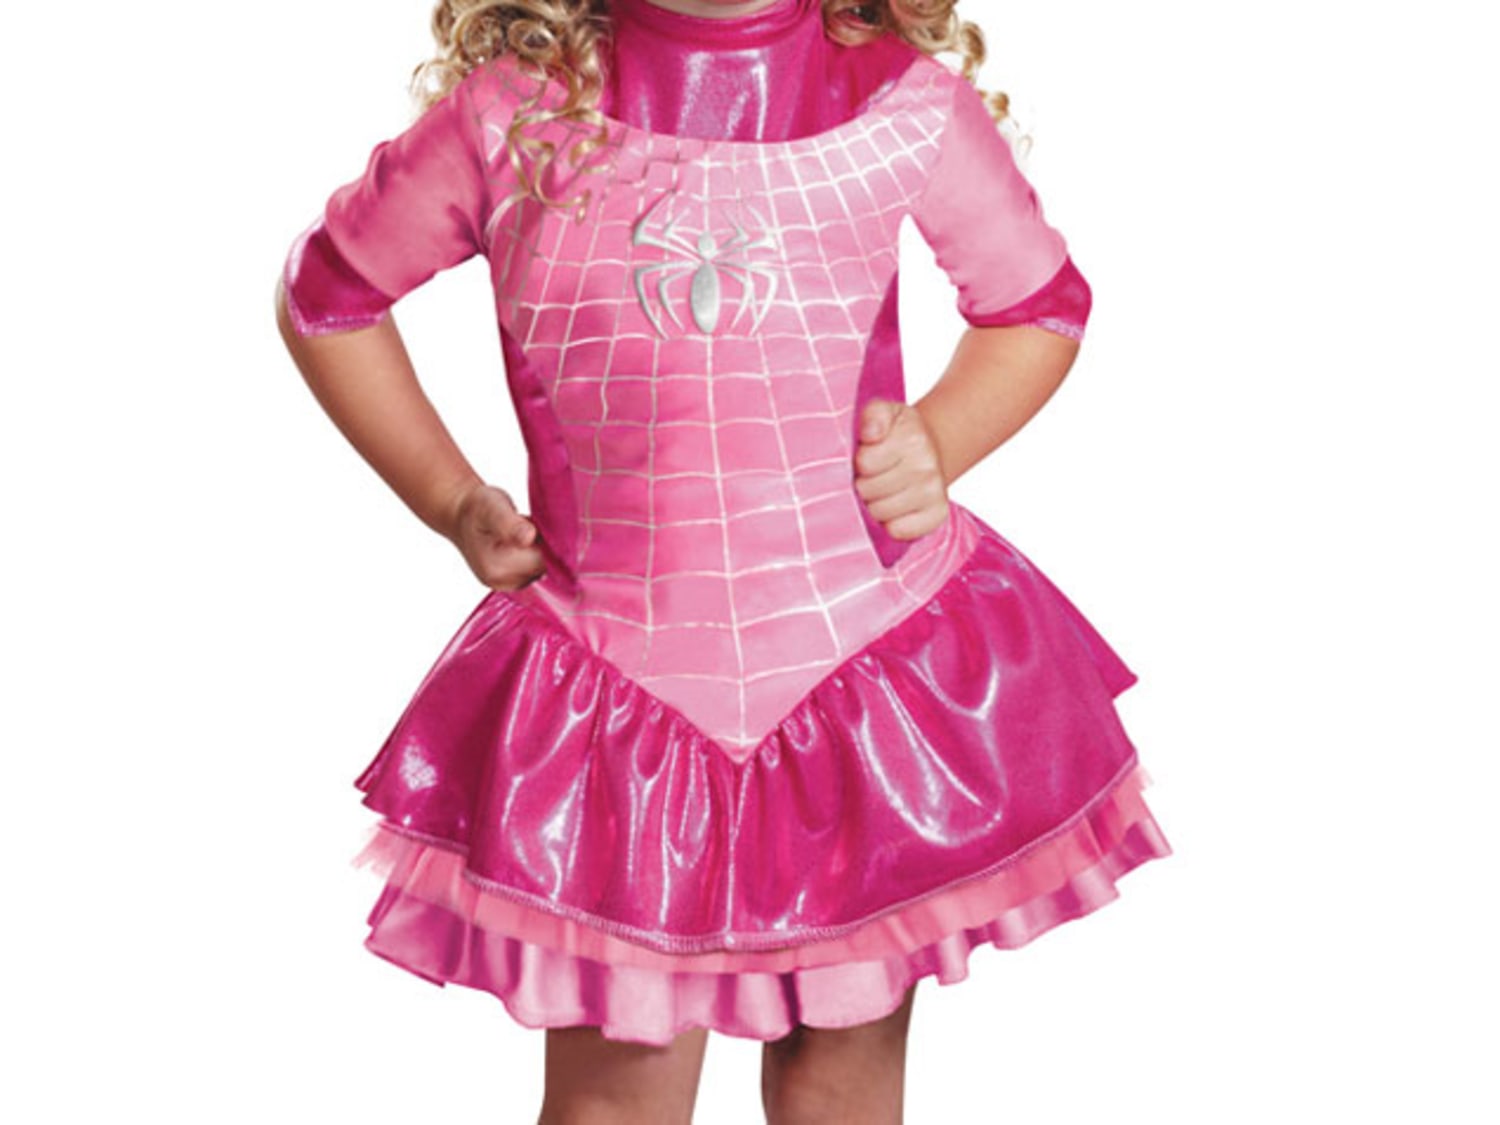 Pink Spider Girl Costume Angers Moms